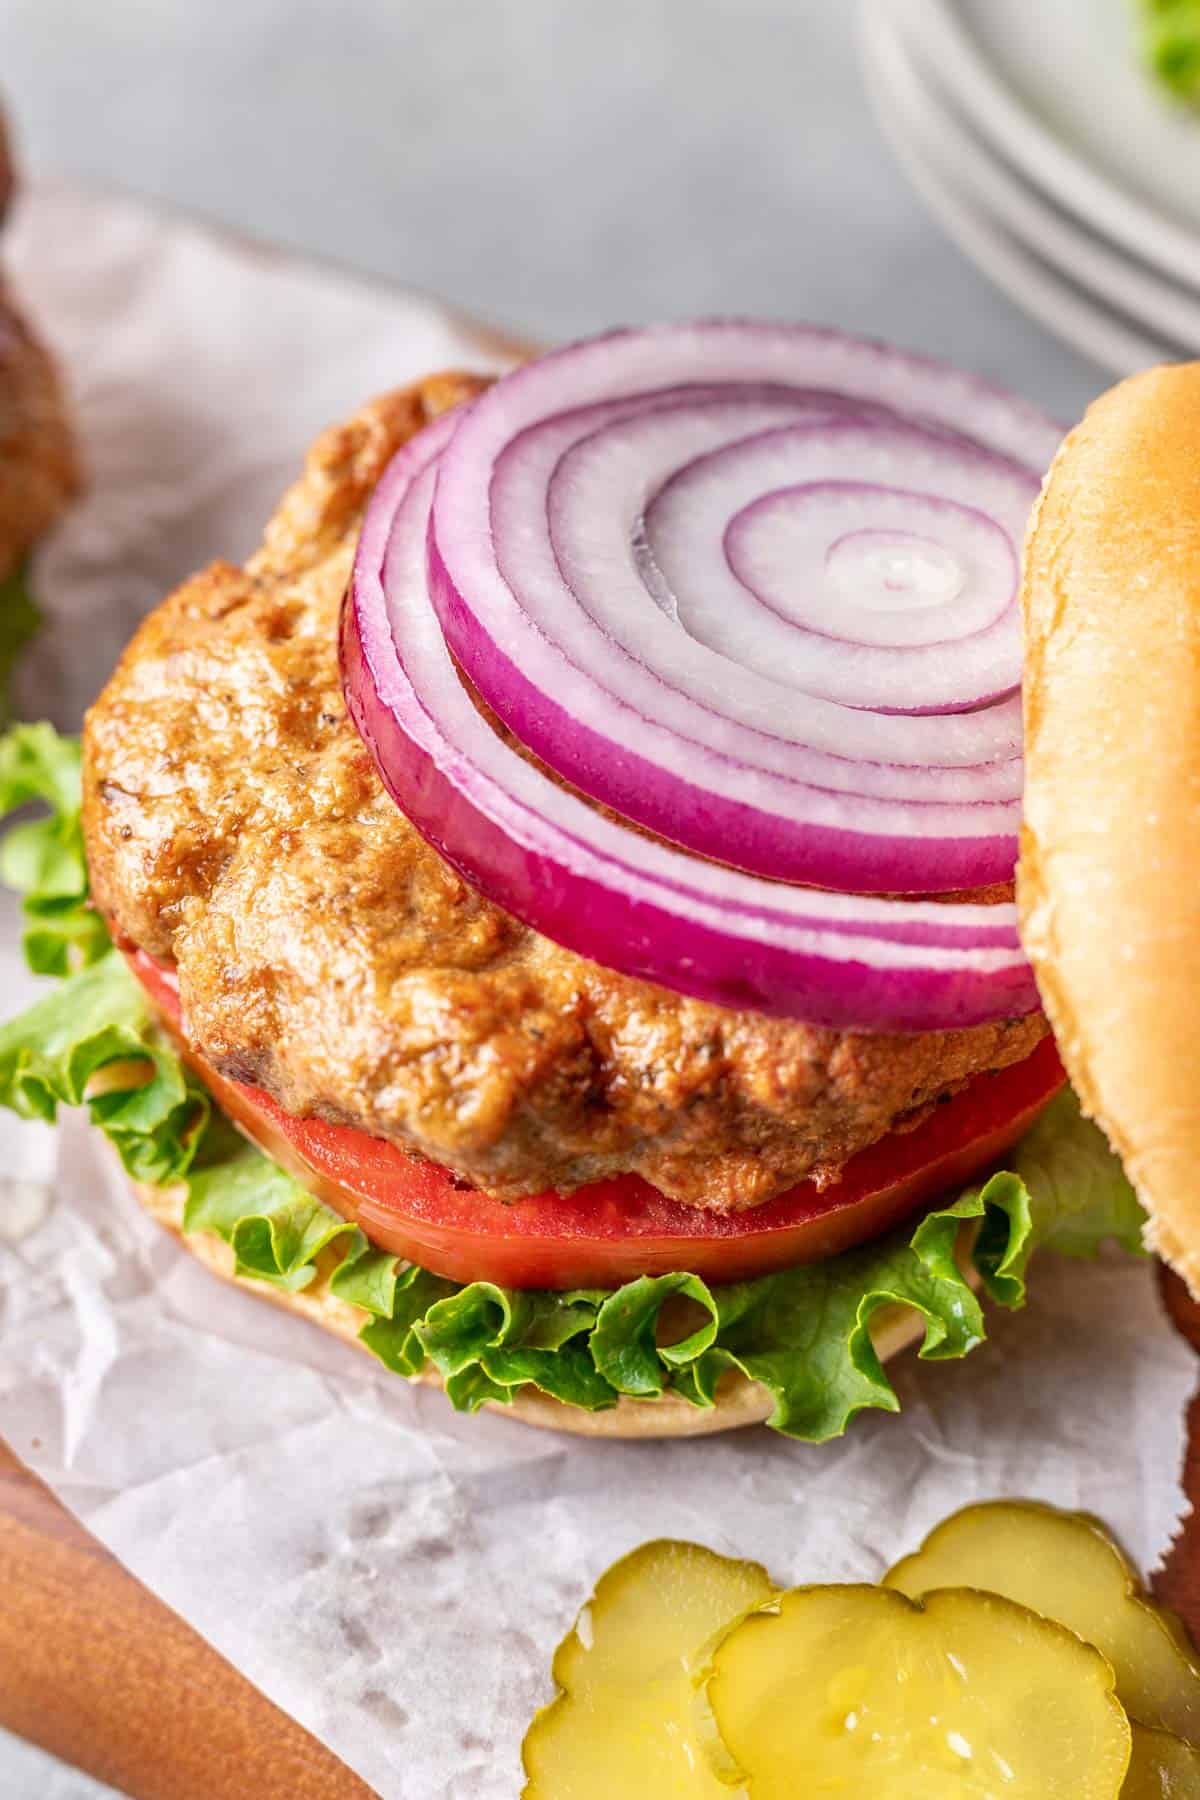 Juicy air fryer turkey burger on a bun with all the fixings.